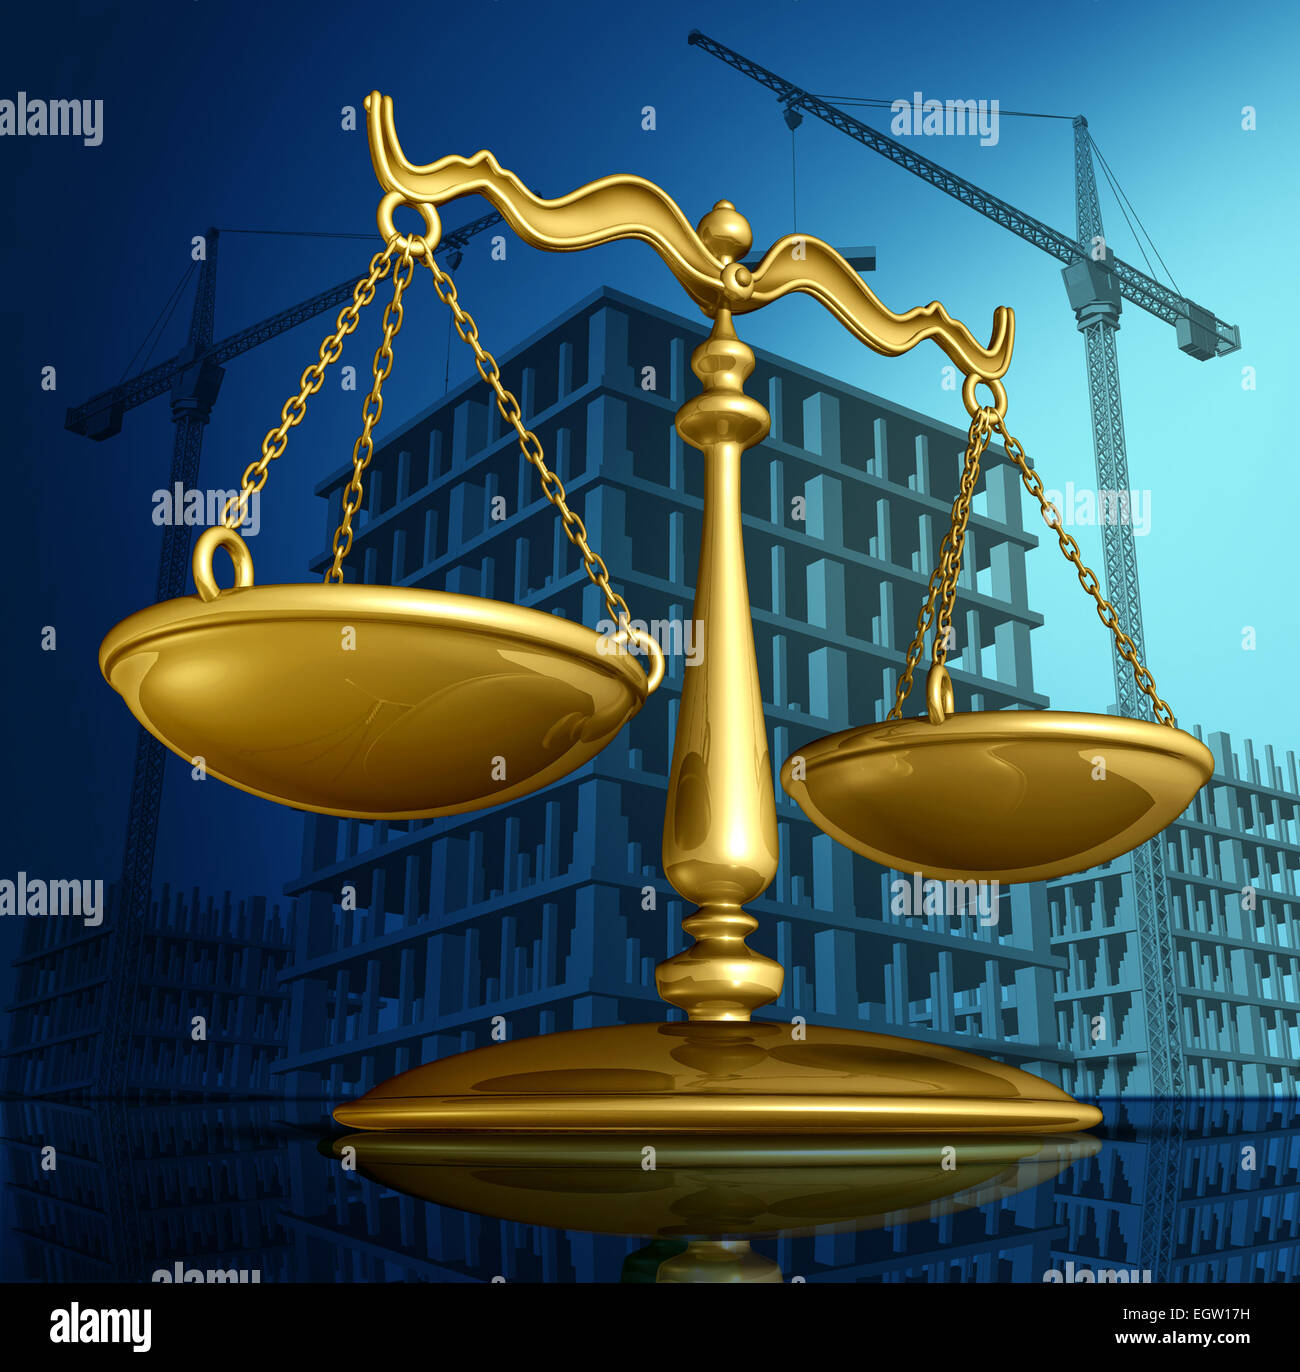 Construction law concept as a justice scale over a working building site with cranes and a structure being built as a concept for architecture permits and real estate regulations. Stock Photo